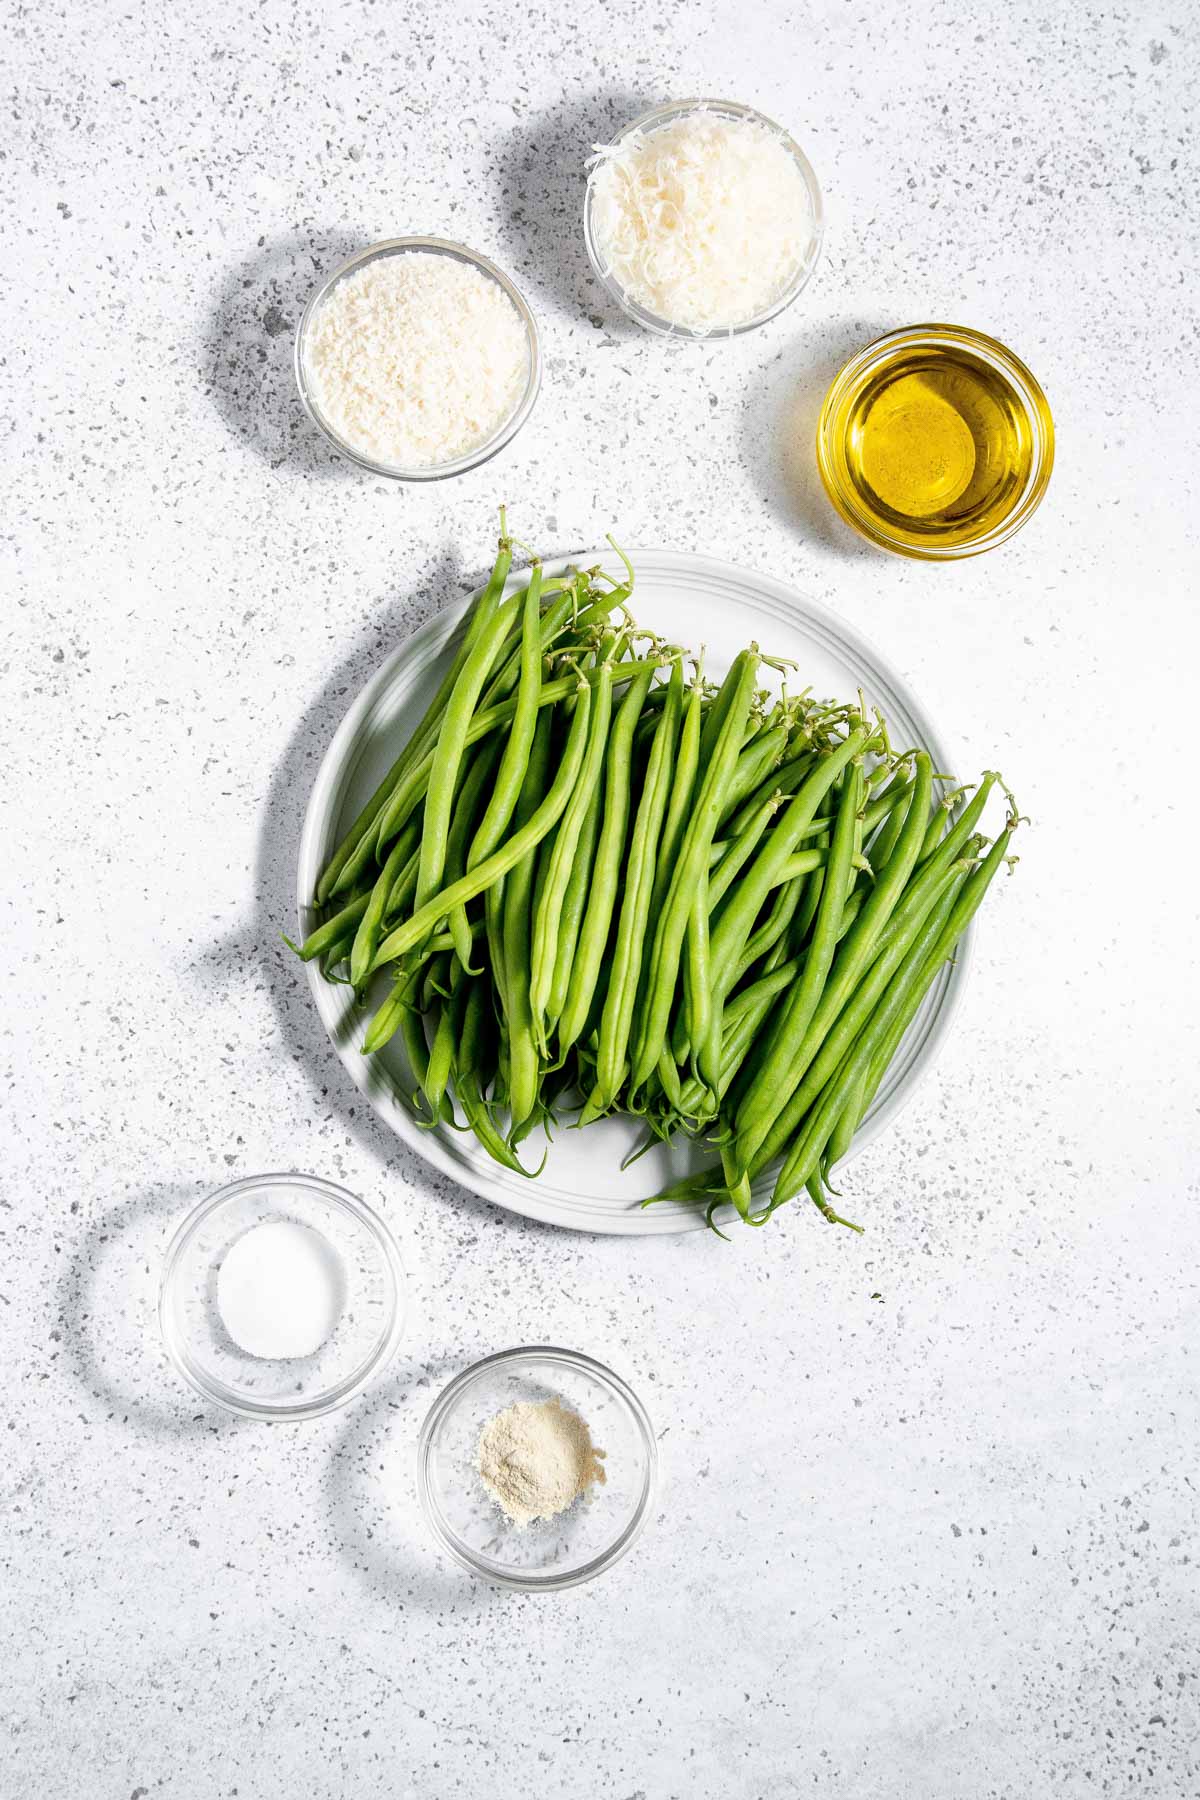 Green beans on a plate with olive oil, parmesan cheese, salt and pepper.